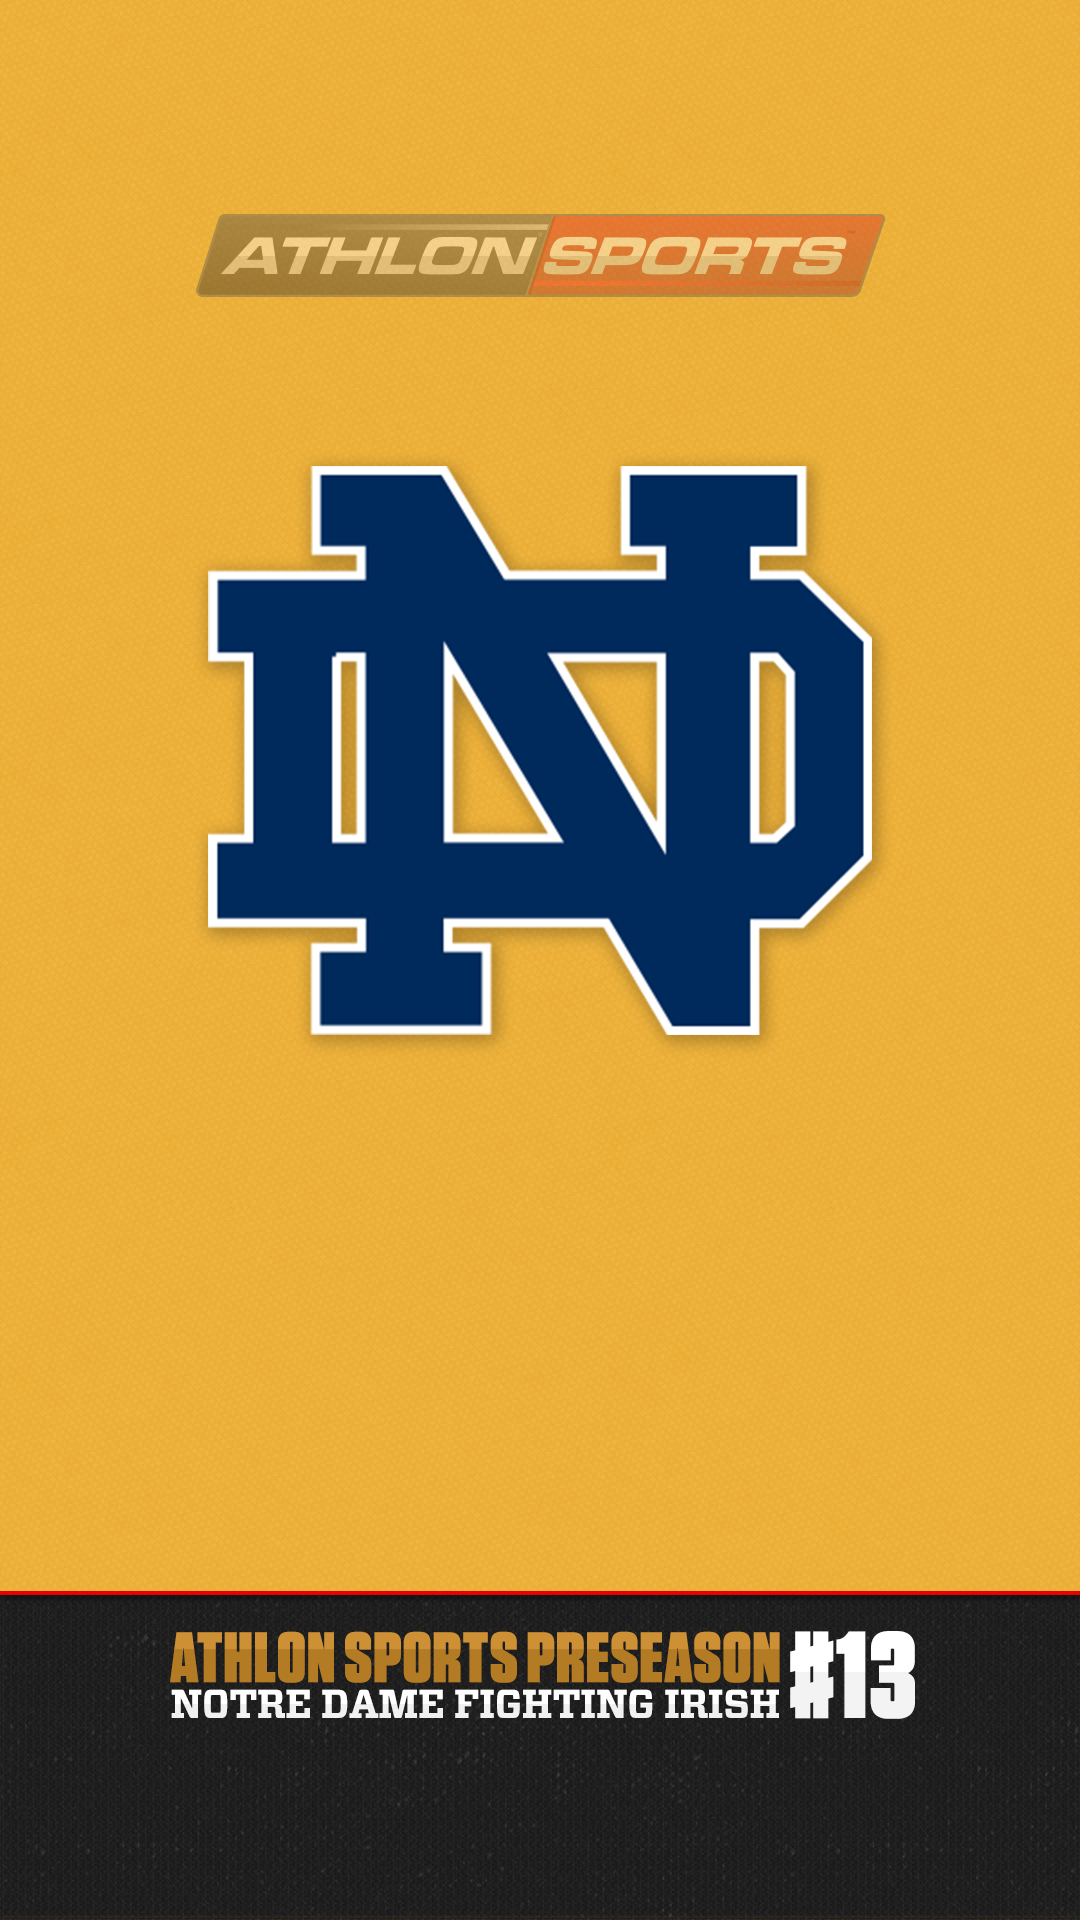 2014 College Football Rankings Notre Dame AthlonSports.com